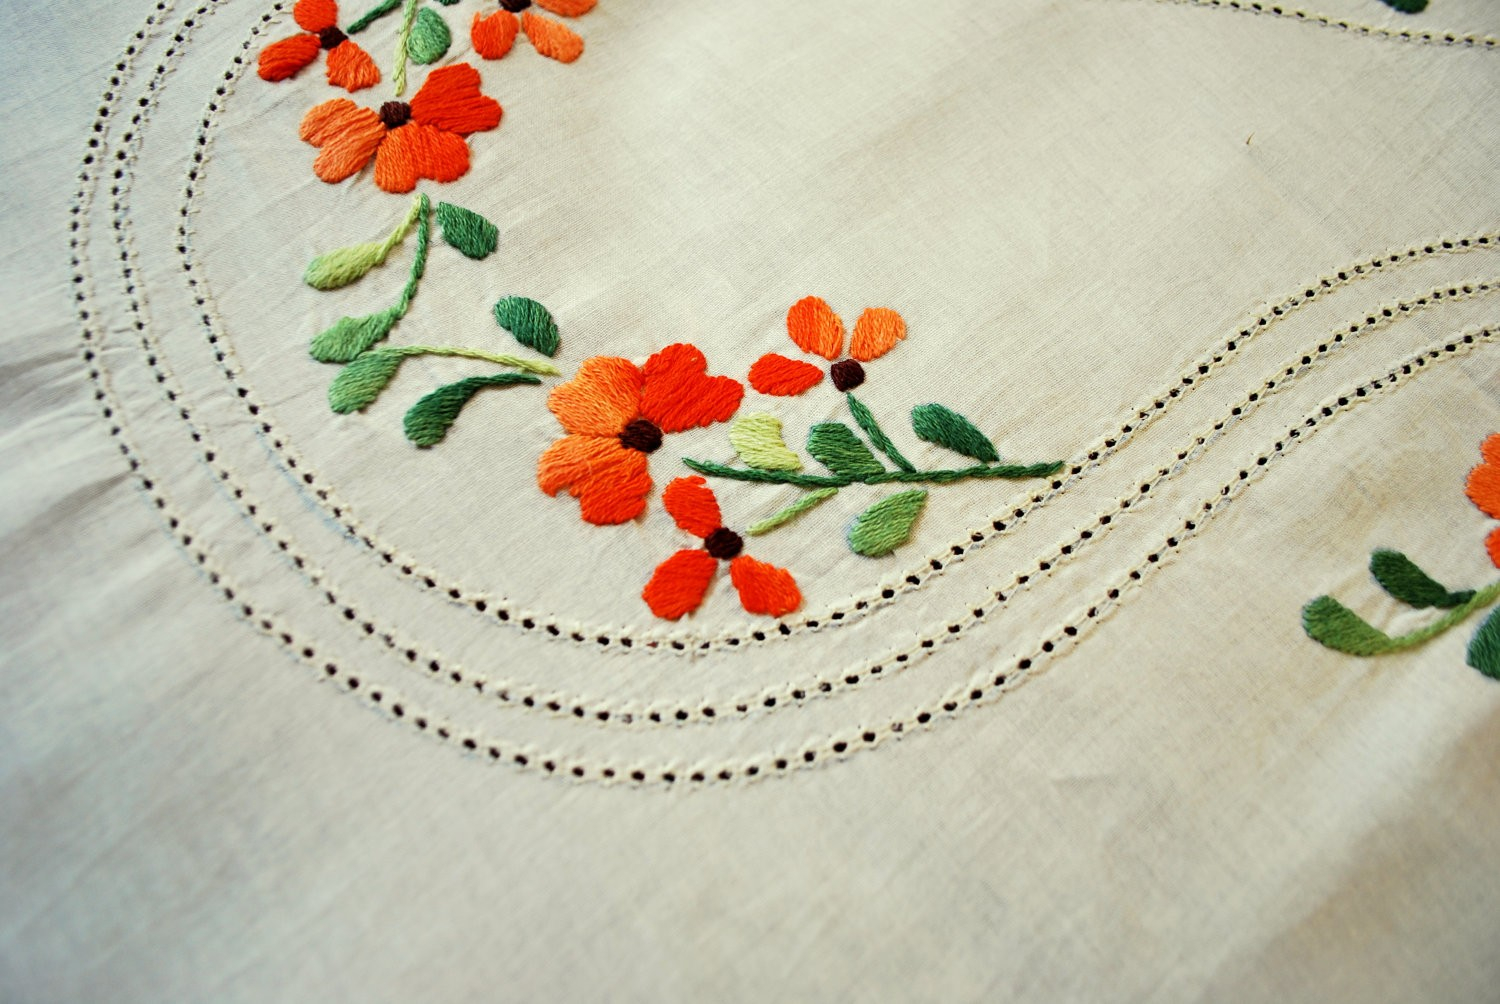 Embroidery By Hand Patterns Ideas For Decorating Bed Sheet Embroidery For Ba Home Art